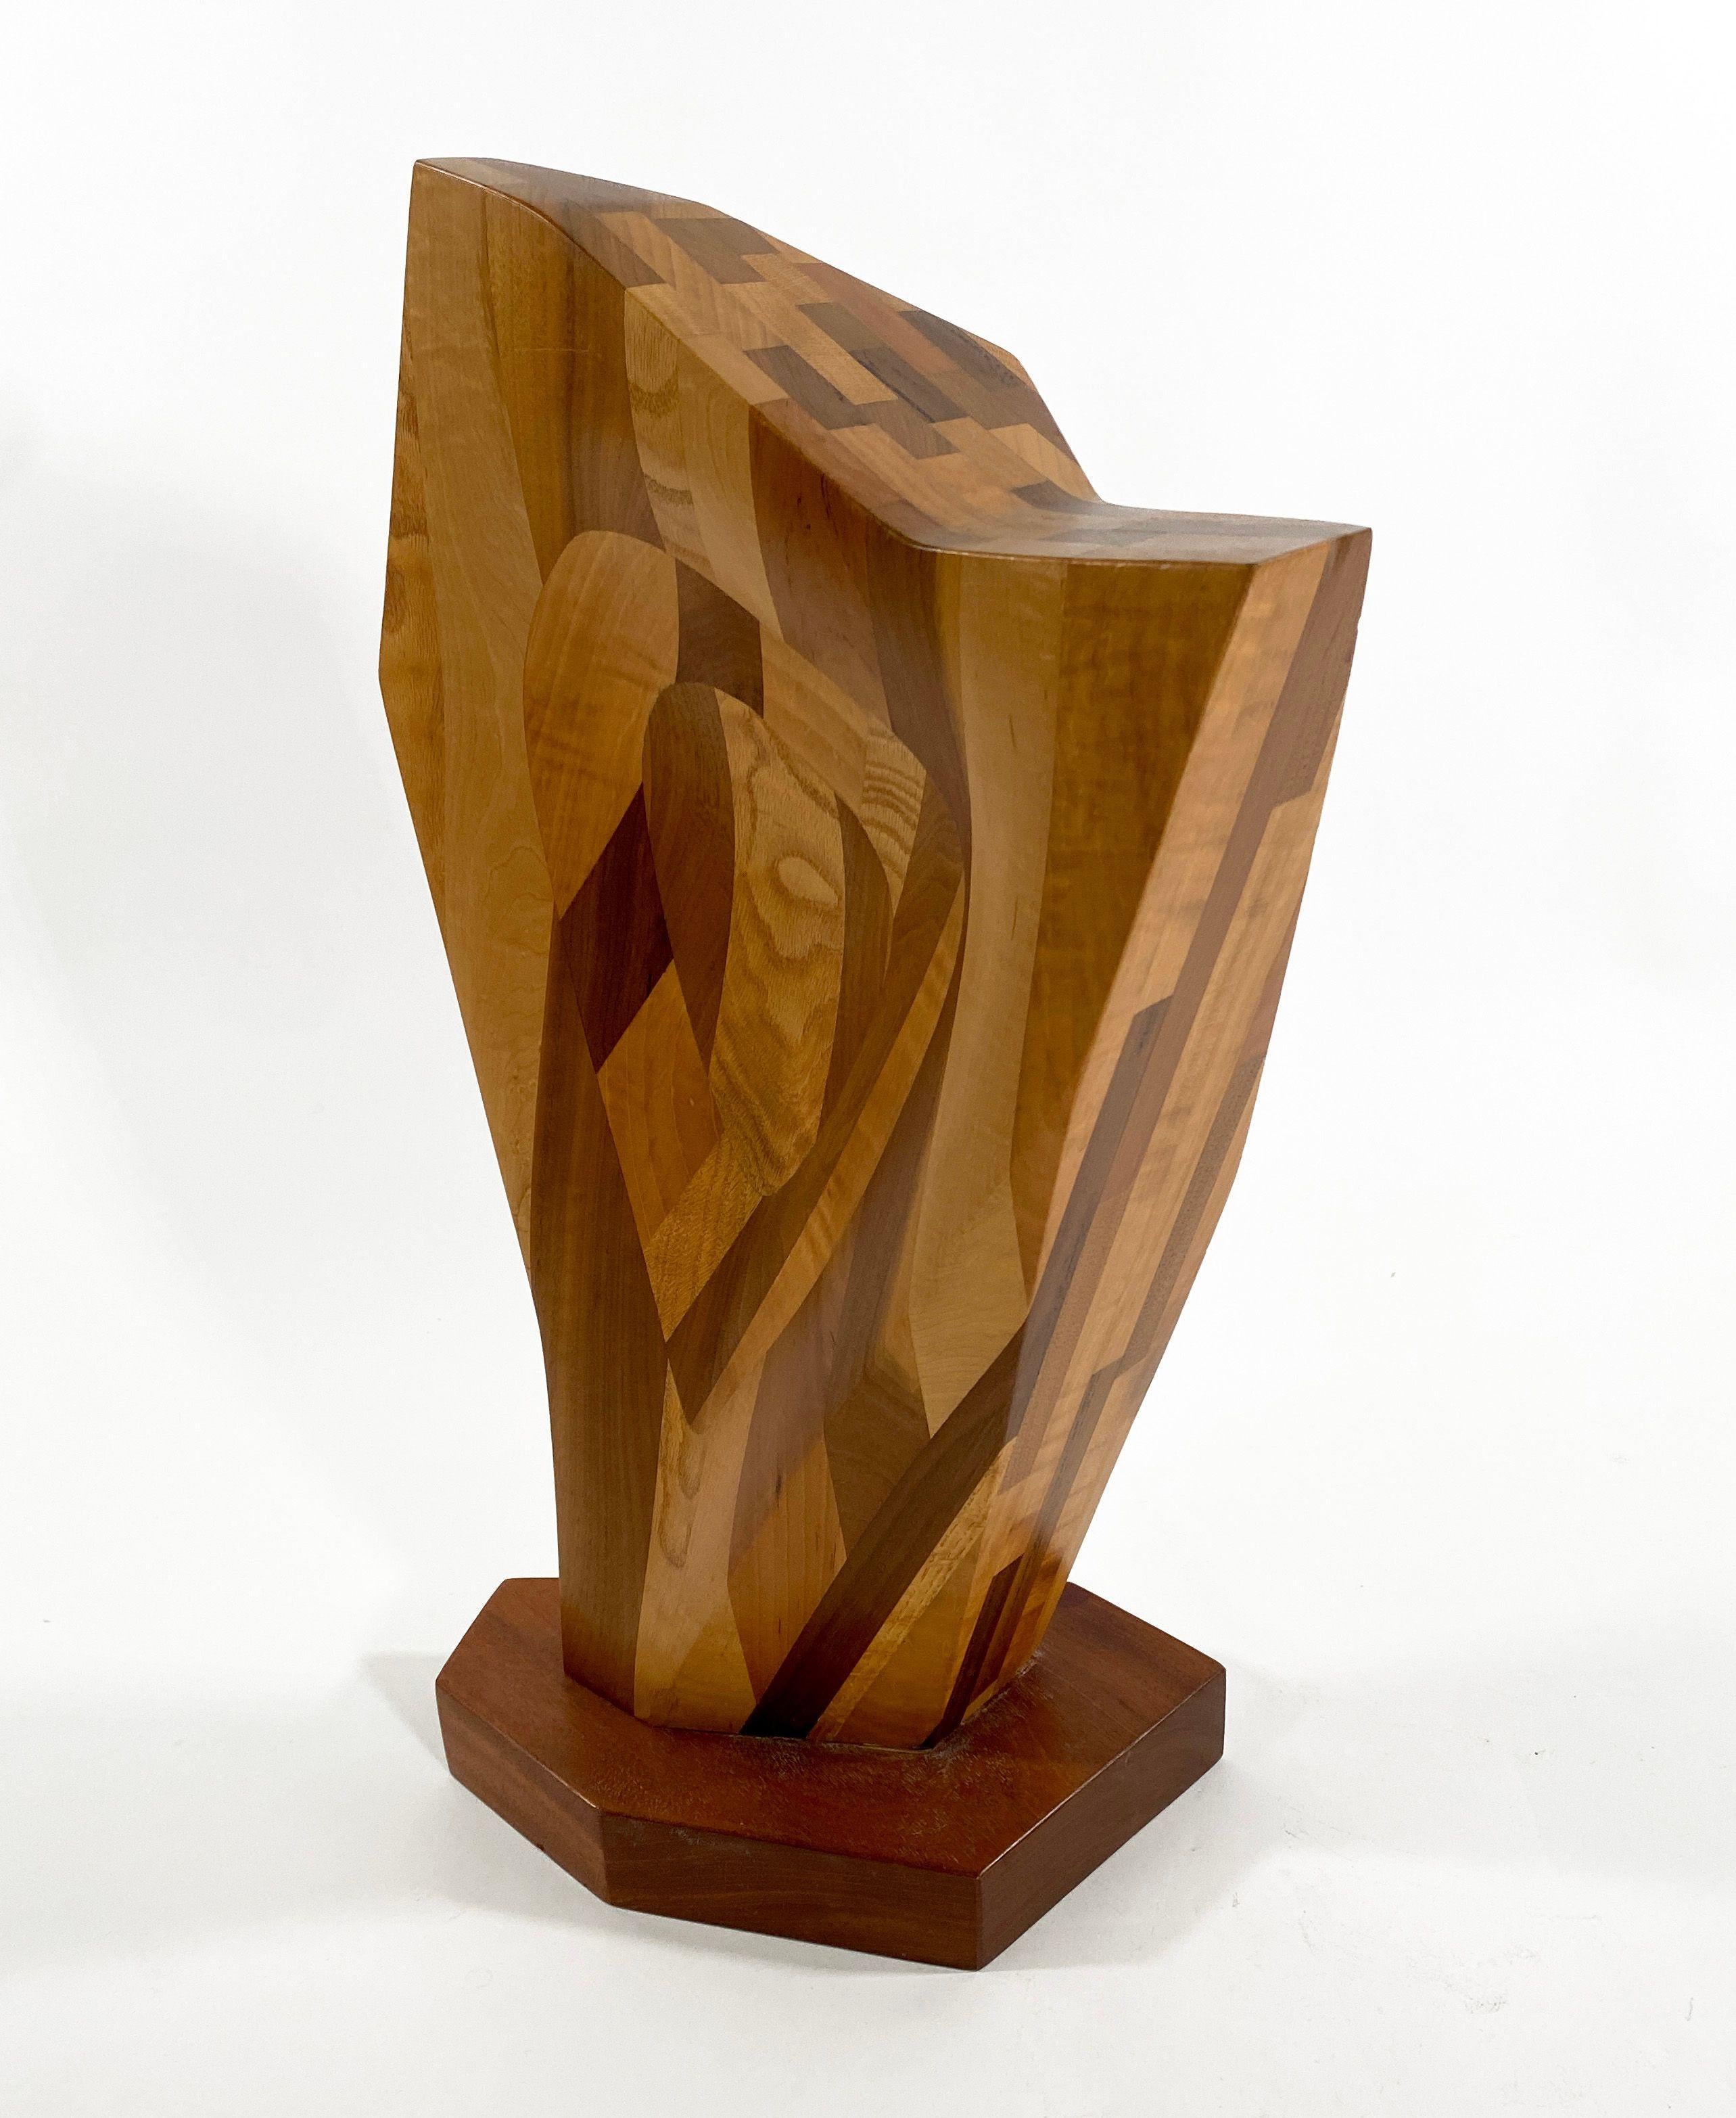 Set of 3 American Modern Abstract Mixed Exotic Wood Sculptures, Paul LaMontagne For Sale 2